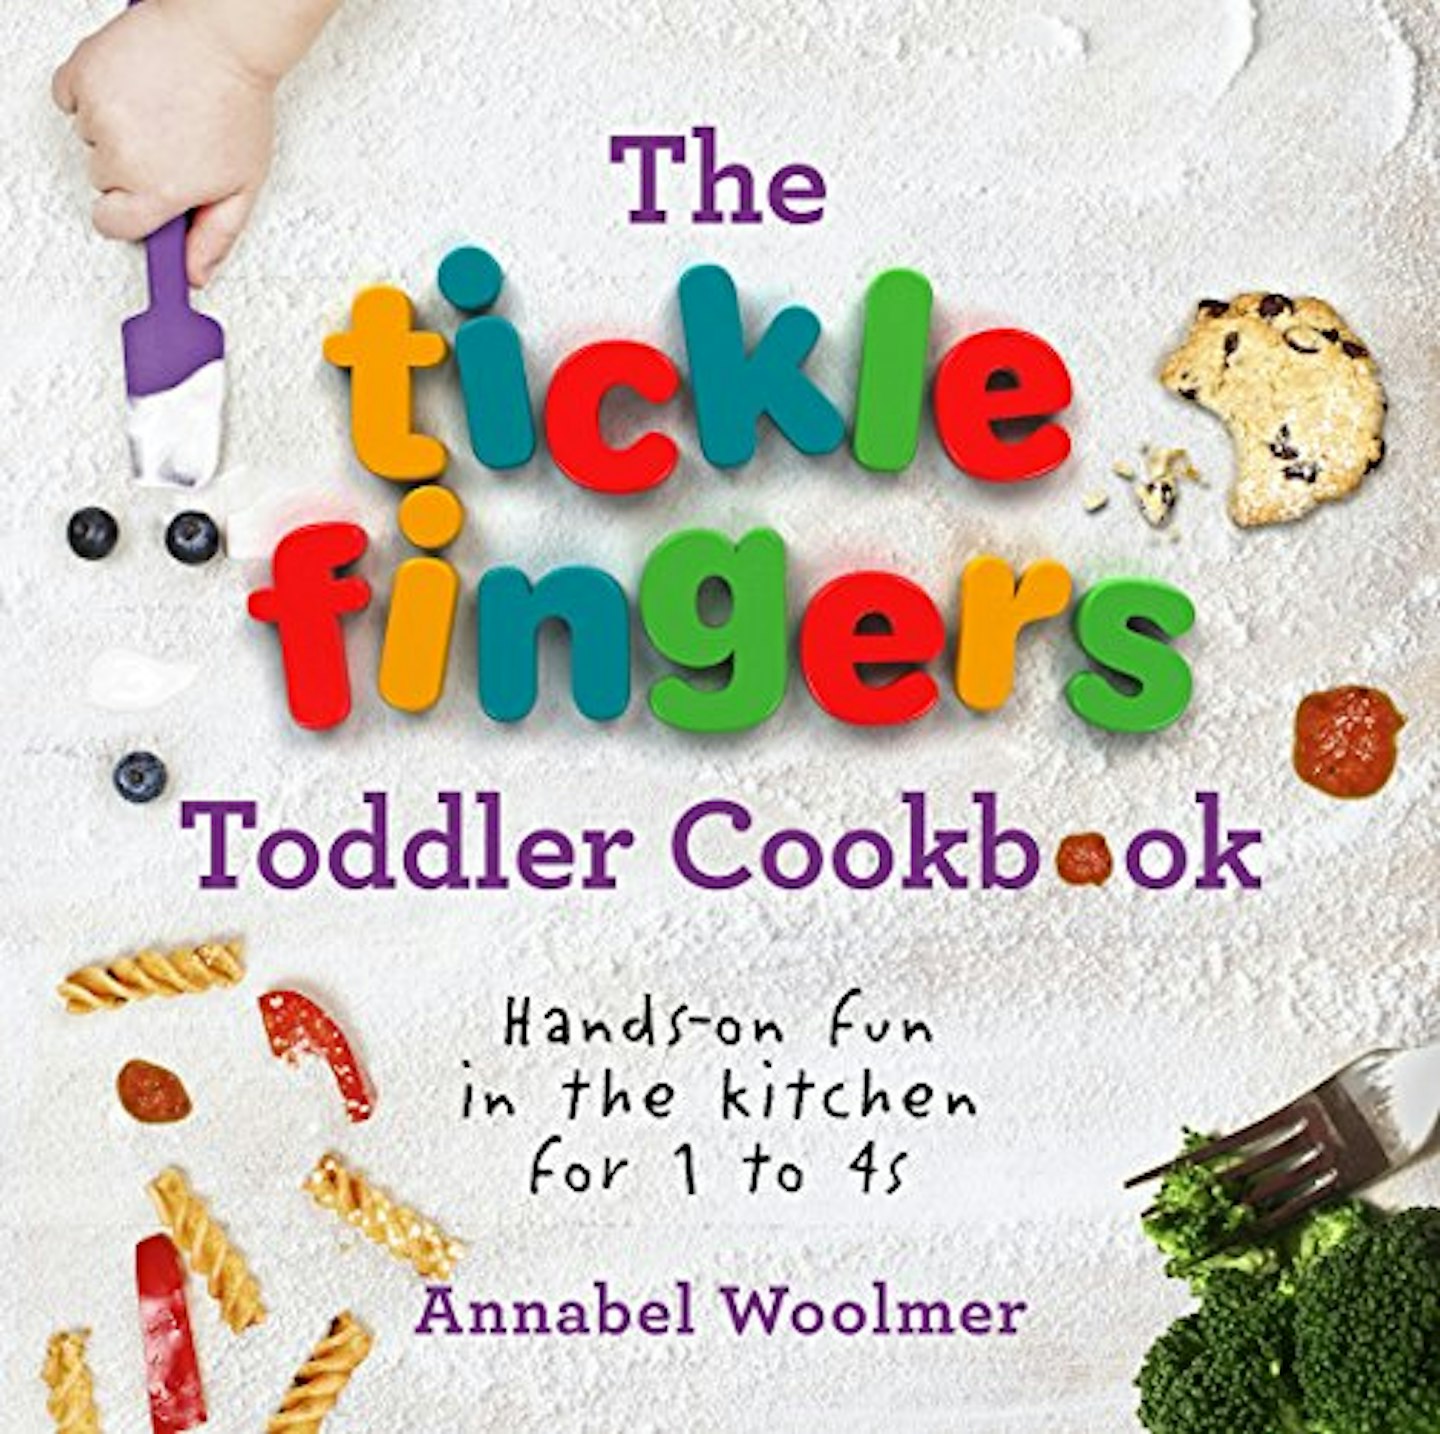 Best kids cookbooks The Tickle Fingers Toddler Cookbook: Hands-on Fun in the Kitchen for 1 to 4s